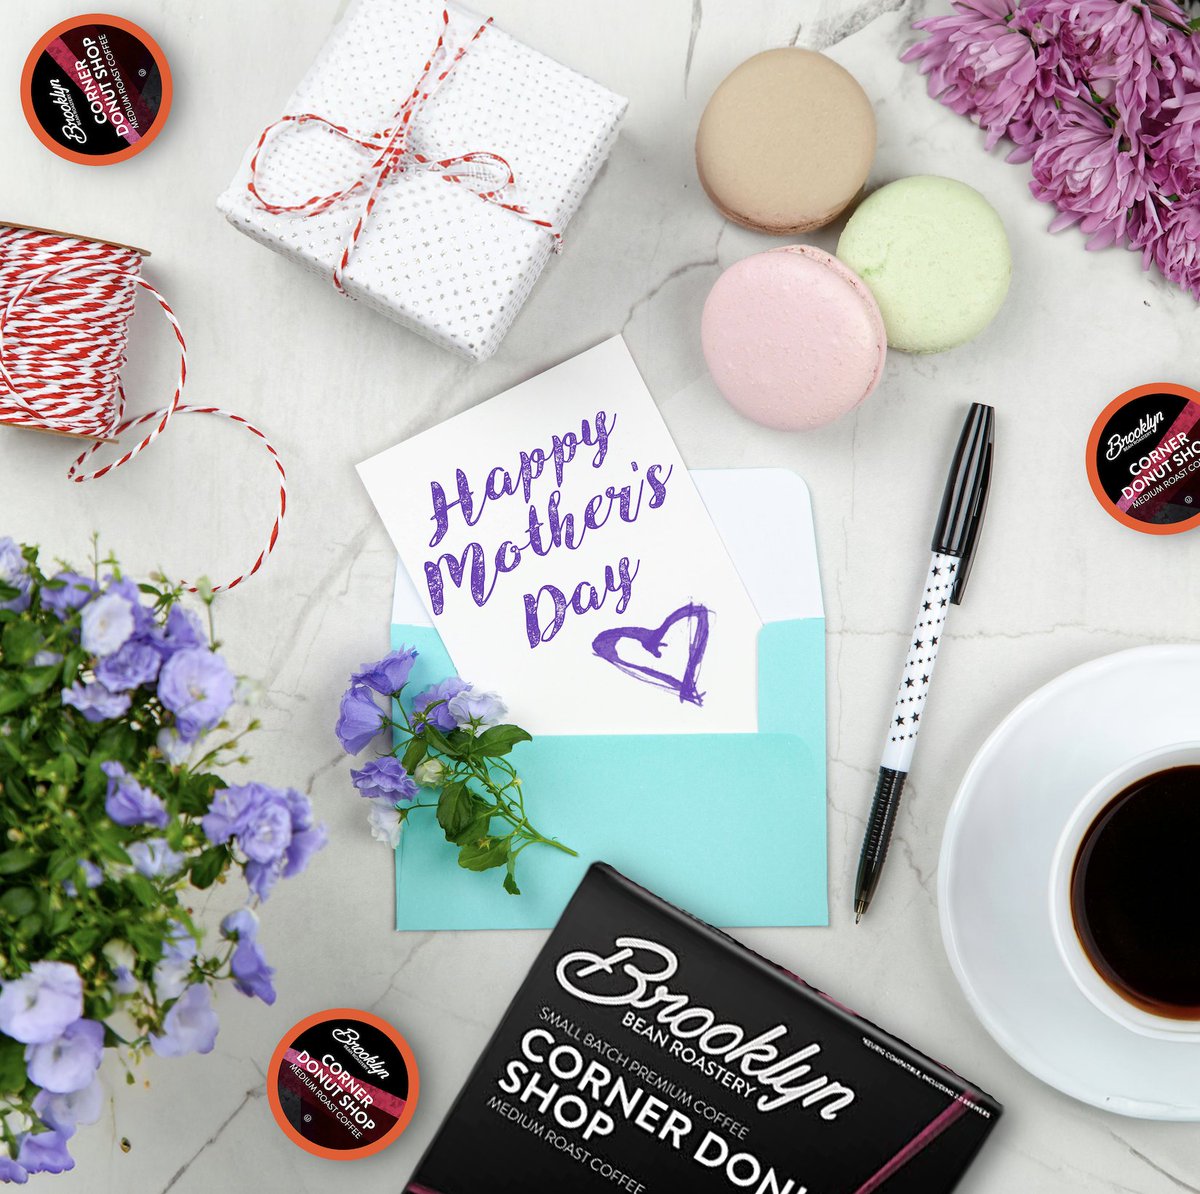 Happy Mother’s Day from BBR! Celebrating all the remarkable moms who fuel their days with love and our exceptional coffee ☕🌻

#CoffeeBreak #NYCCoffee #NewYork #CoffeeLover #CoffeeGram #Cafe #CornerDonutShop #MothersDay